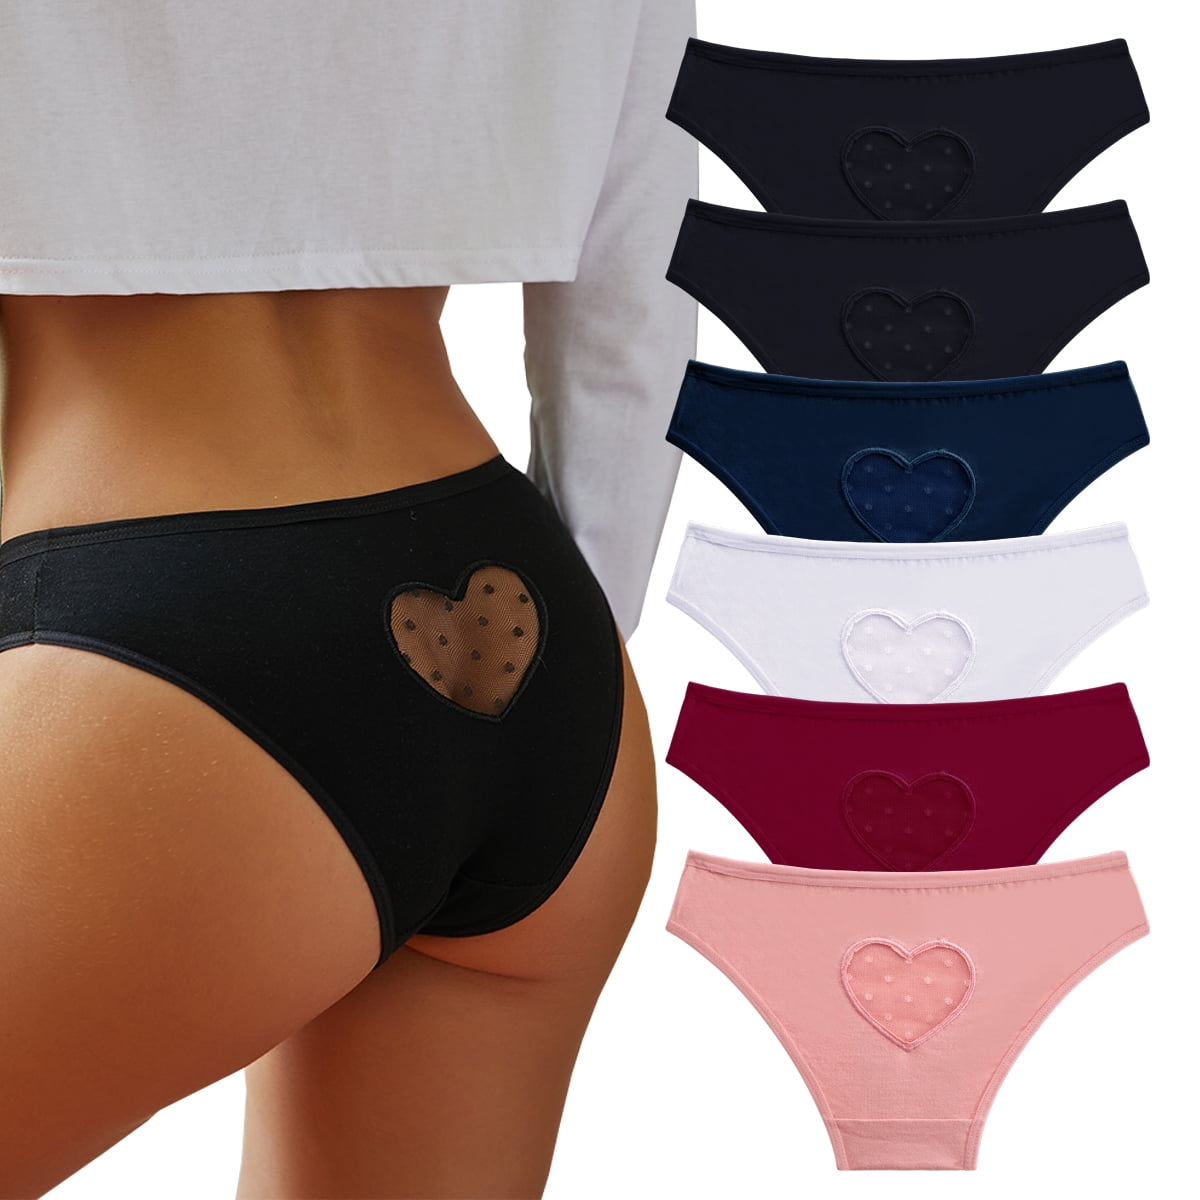 BAJAOEY Women Underwear Cotton, Cheeky Panties Soft & Breathable Bikinis  Panties for Women Pack for Young Ladies 5 Pack at  Women's Clothing  store